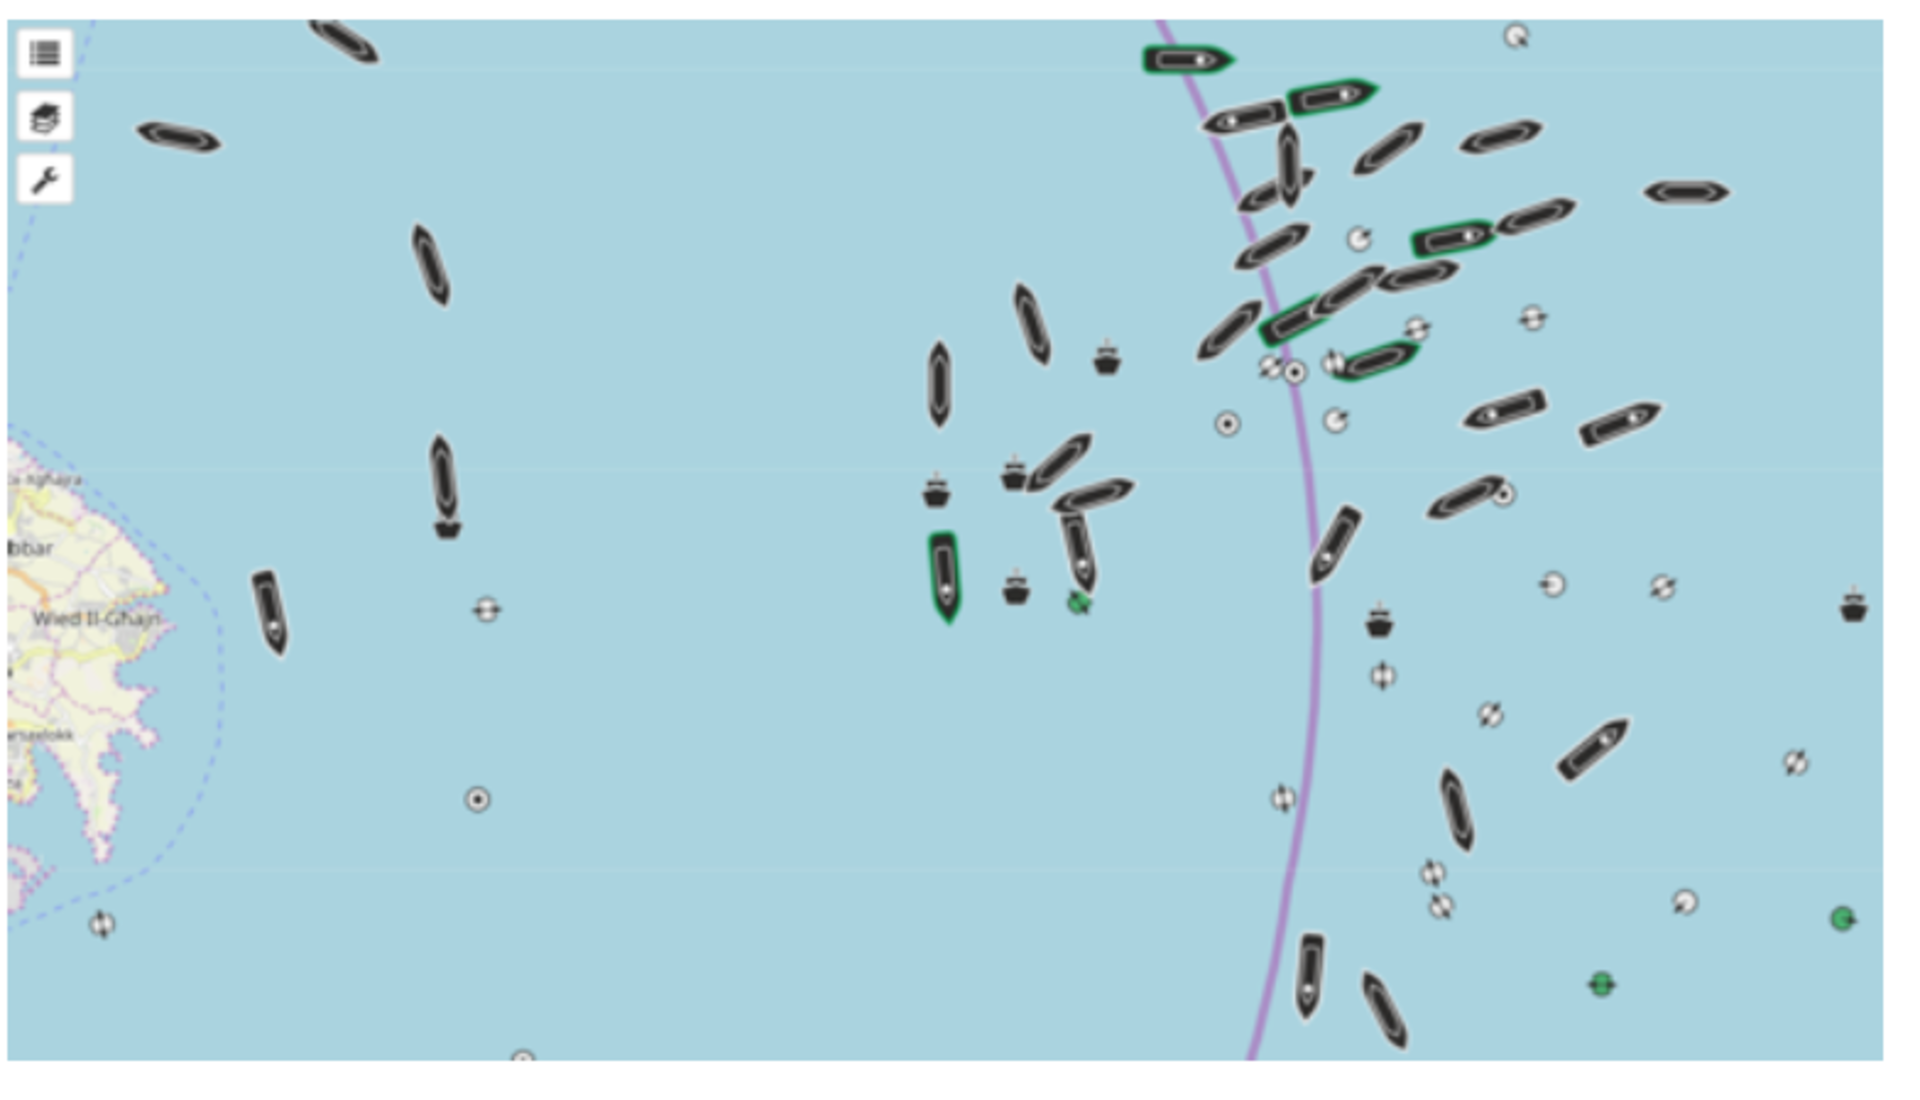 GSTP's OSIRIS project tracks ships and oil spills